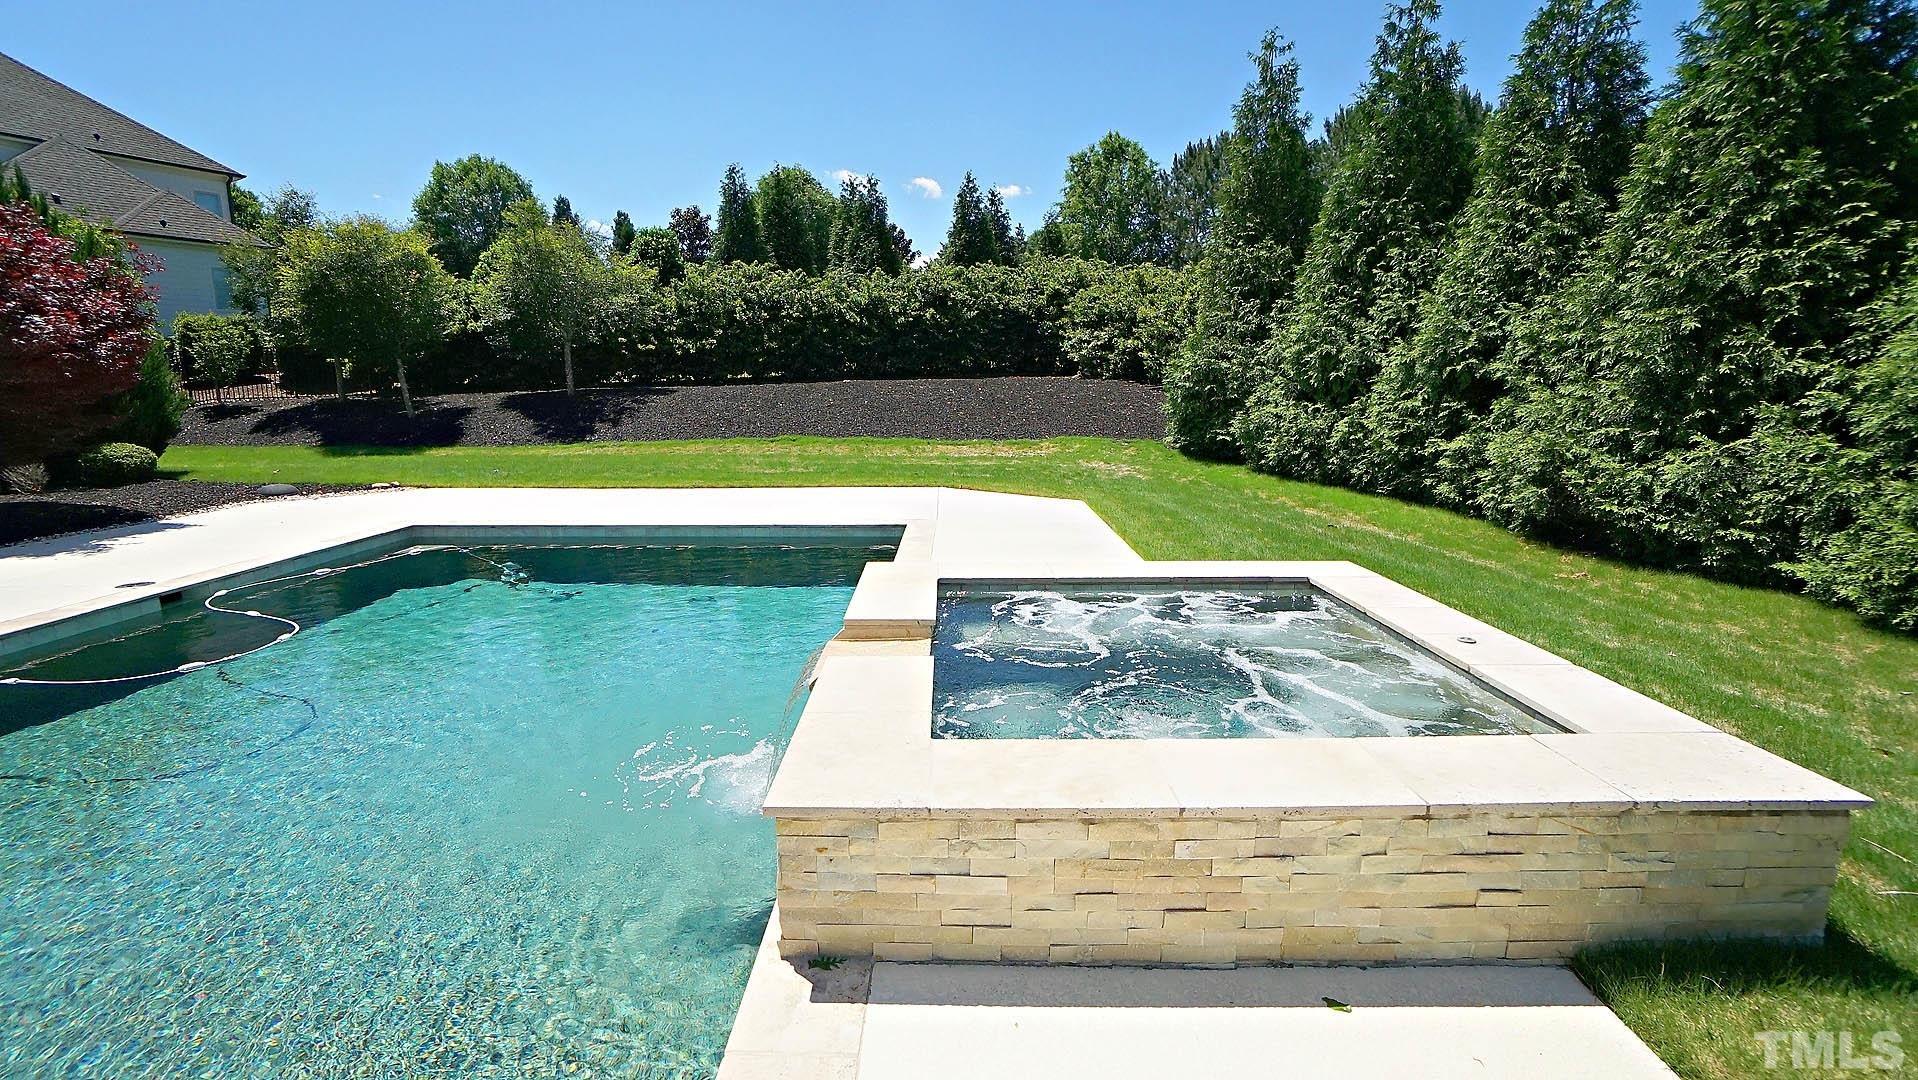 Heated Saltwater Pool with hot tub and fountains.